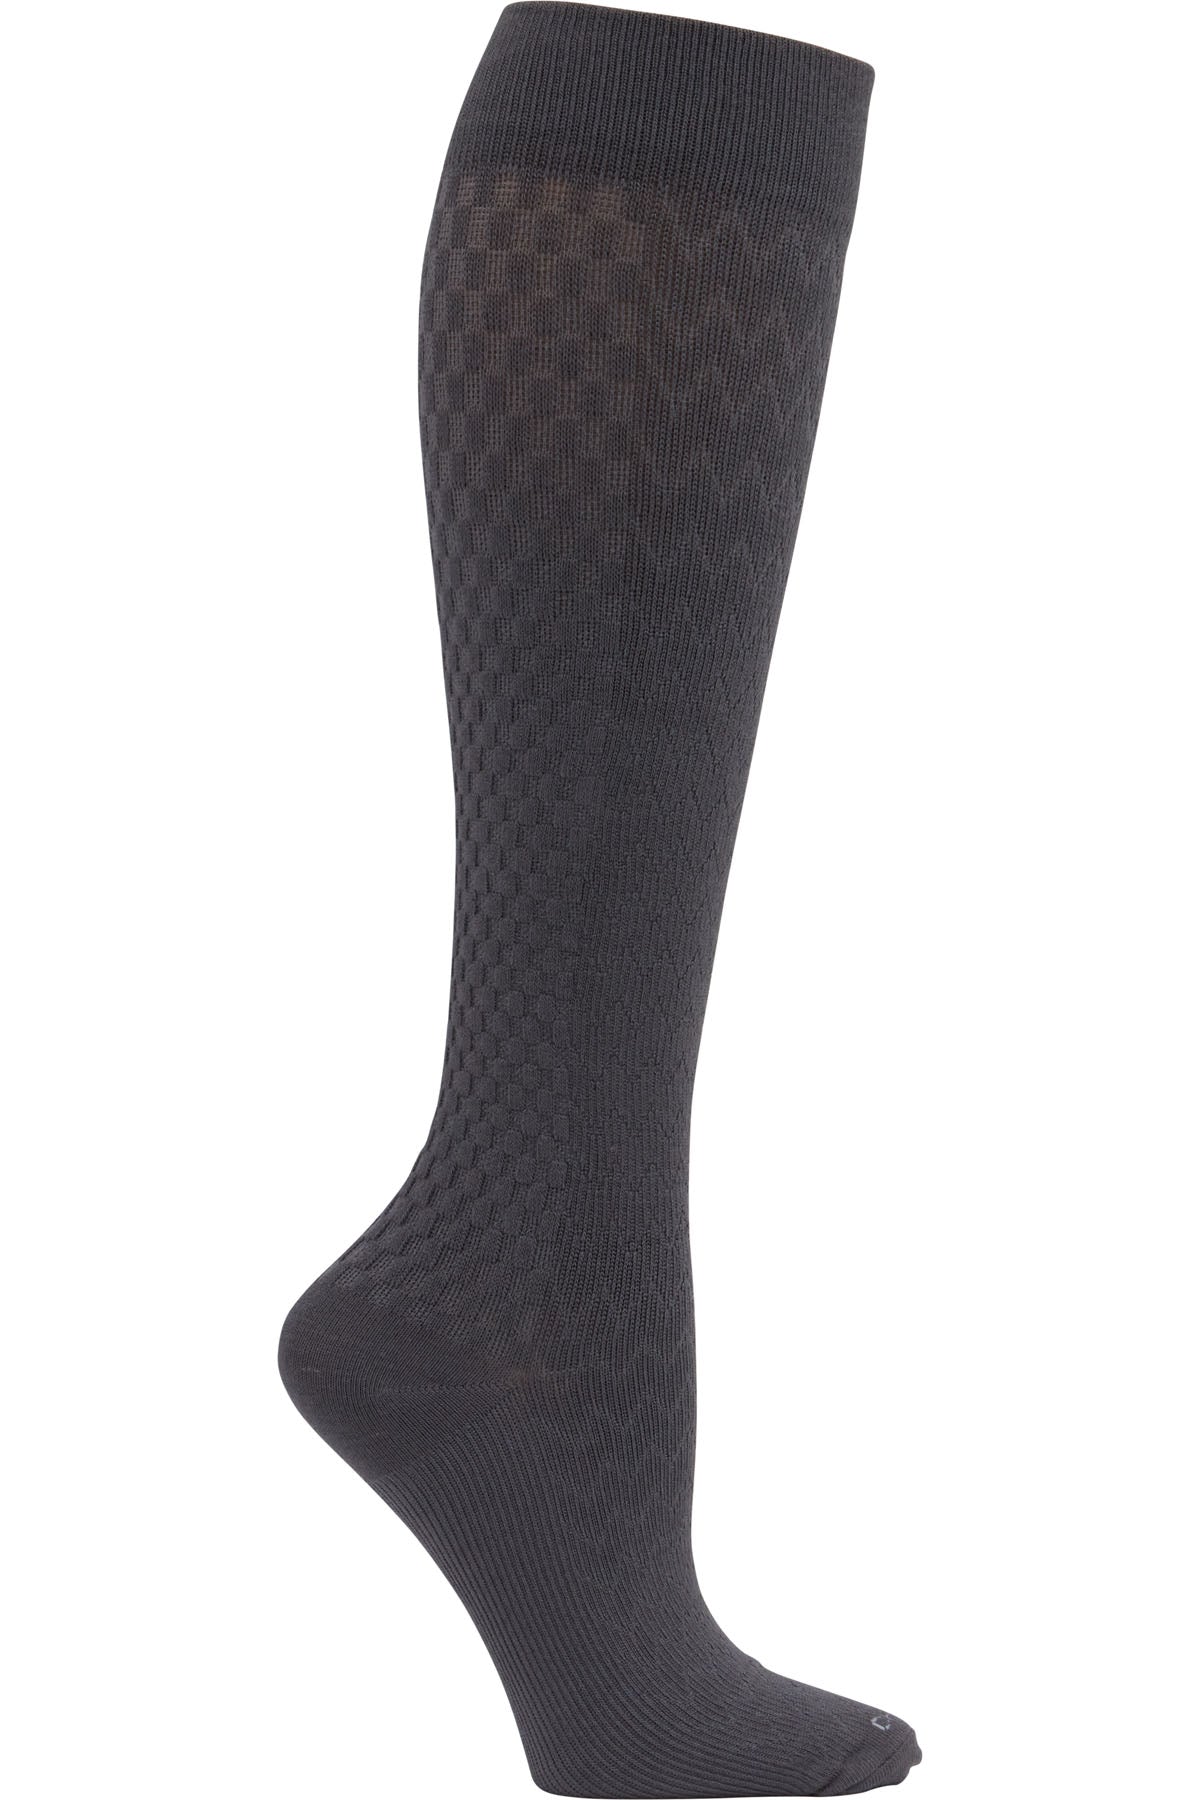 Cherokee Mild Compression Socks True Support 10-15 mmHg in Graphite at Parker's Clothing and Shoes.